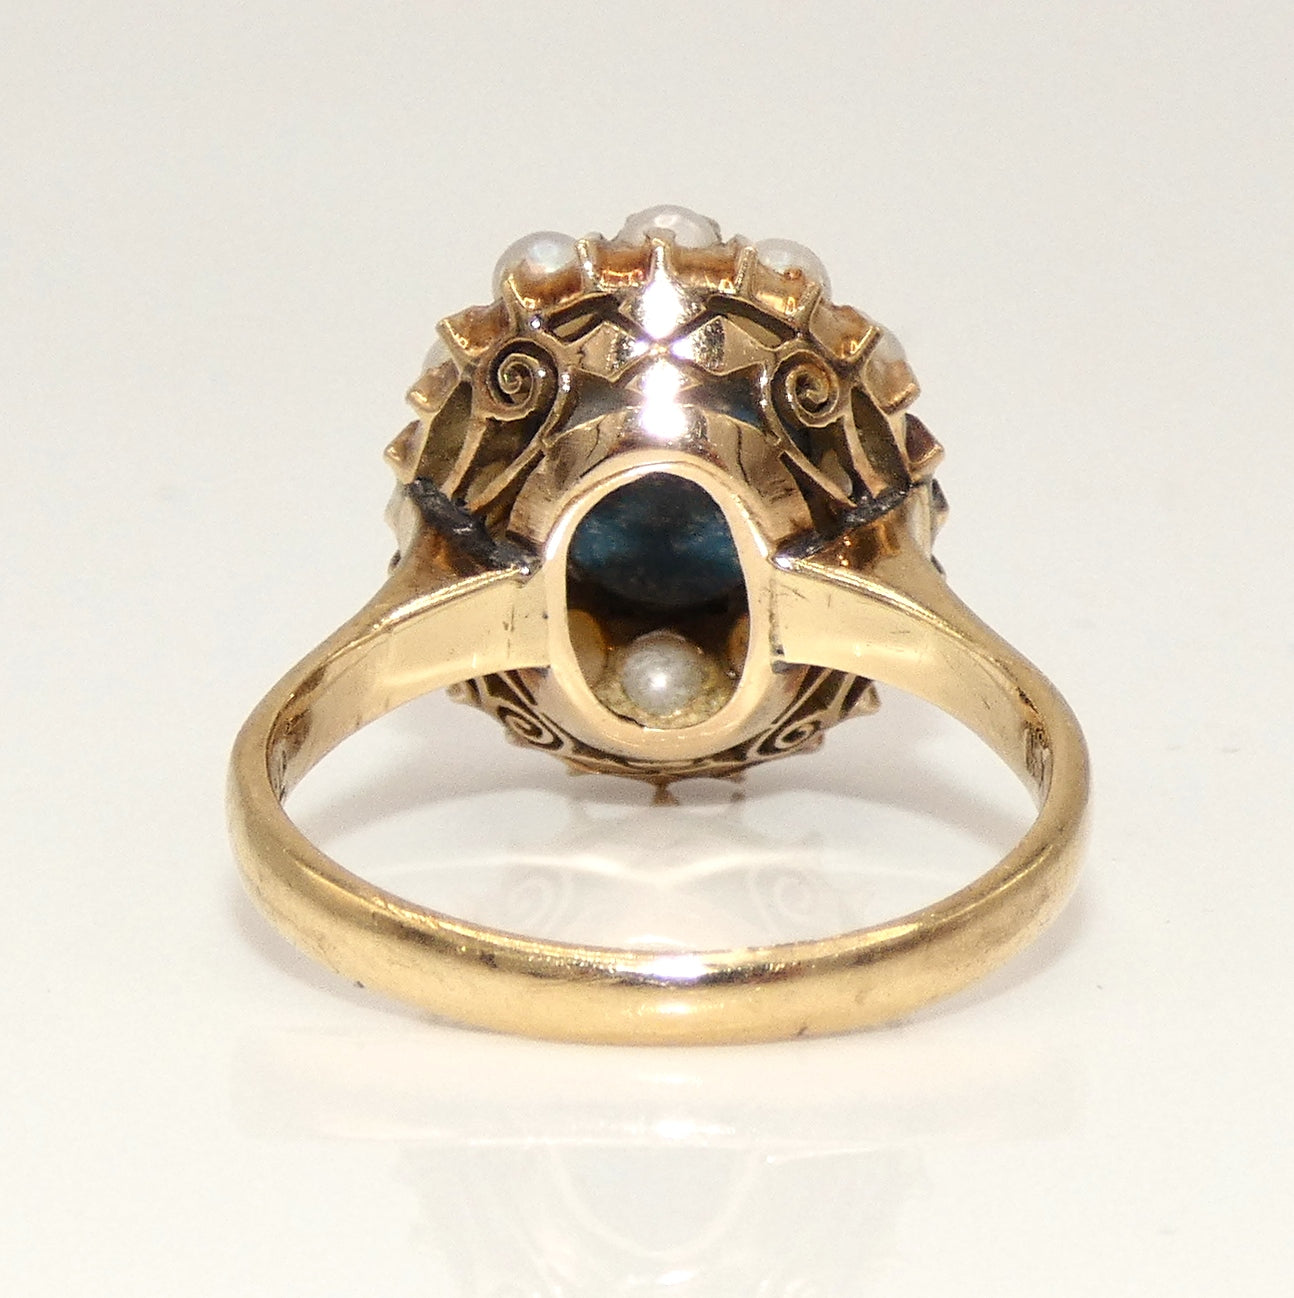 14K Gold Opal & Pearls Ring